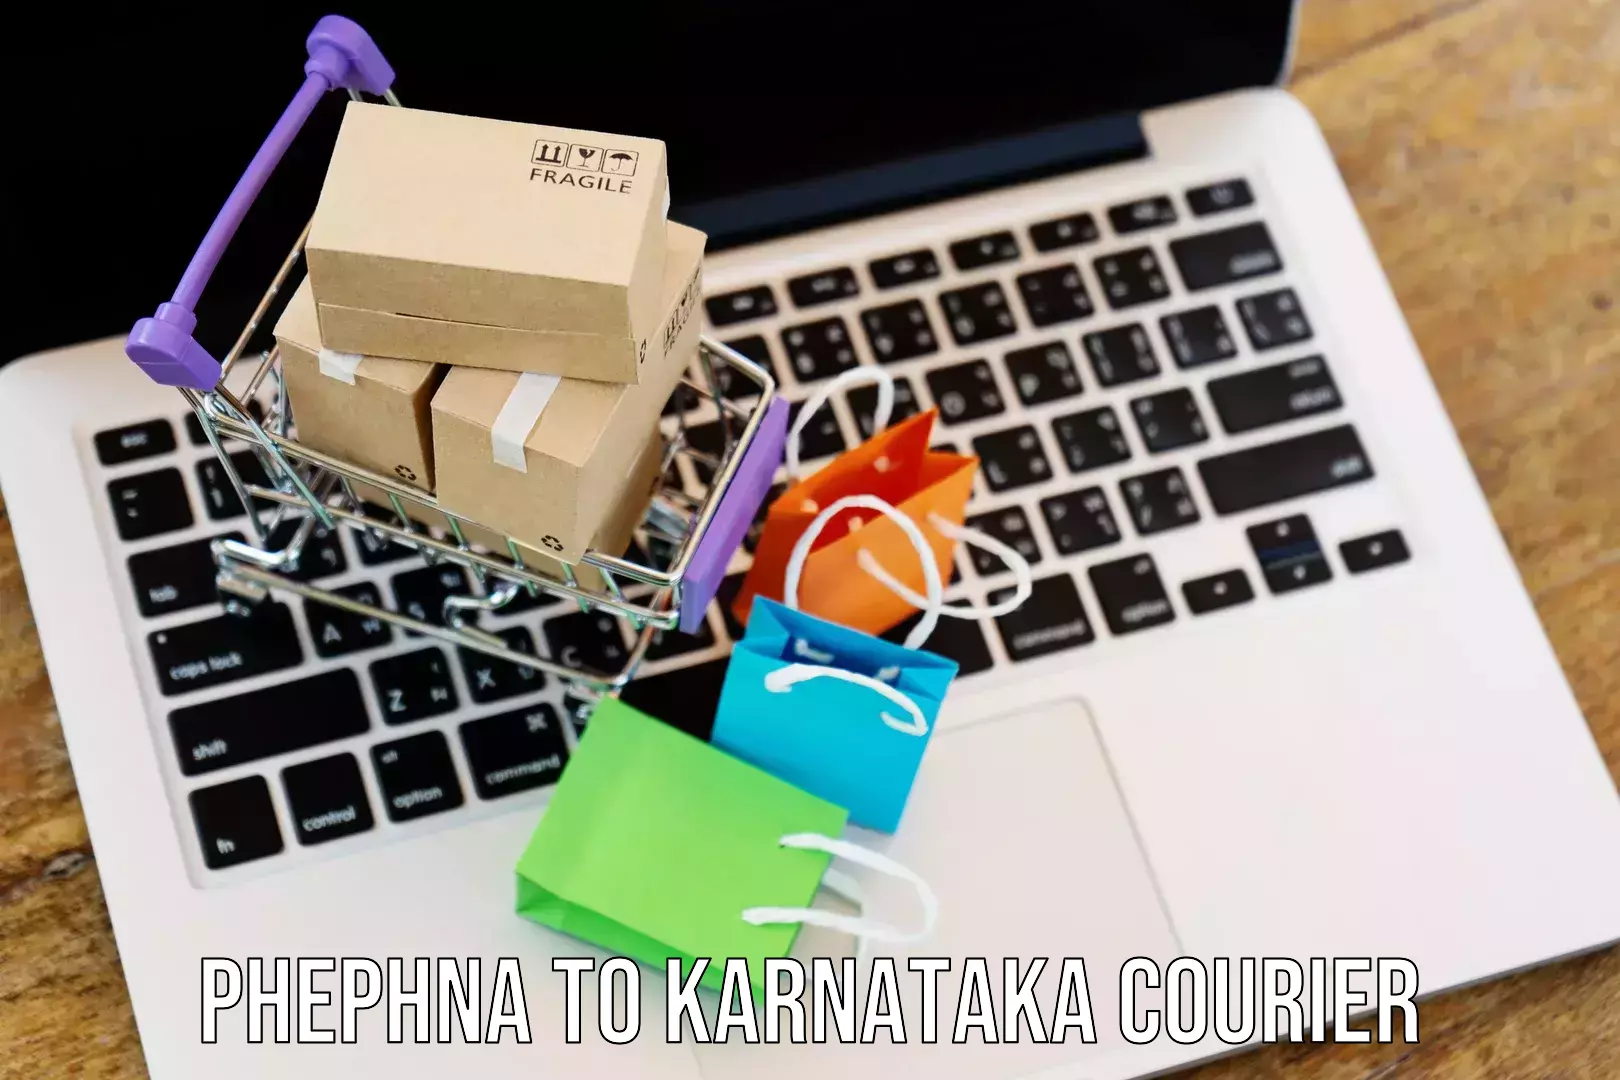 State-of-the-art courier technology in Phephna to Yaragatti